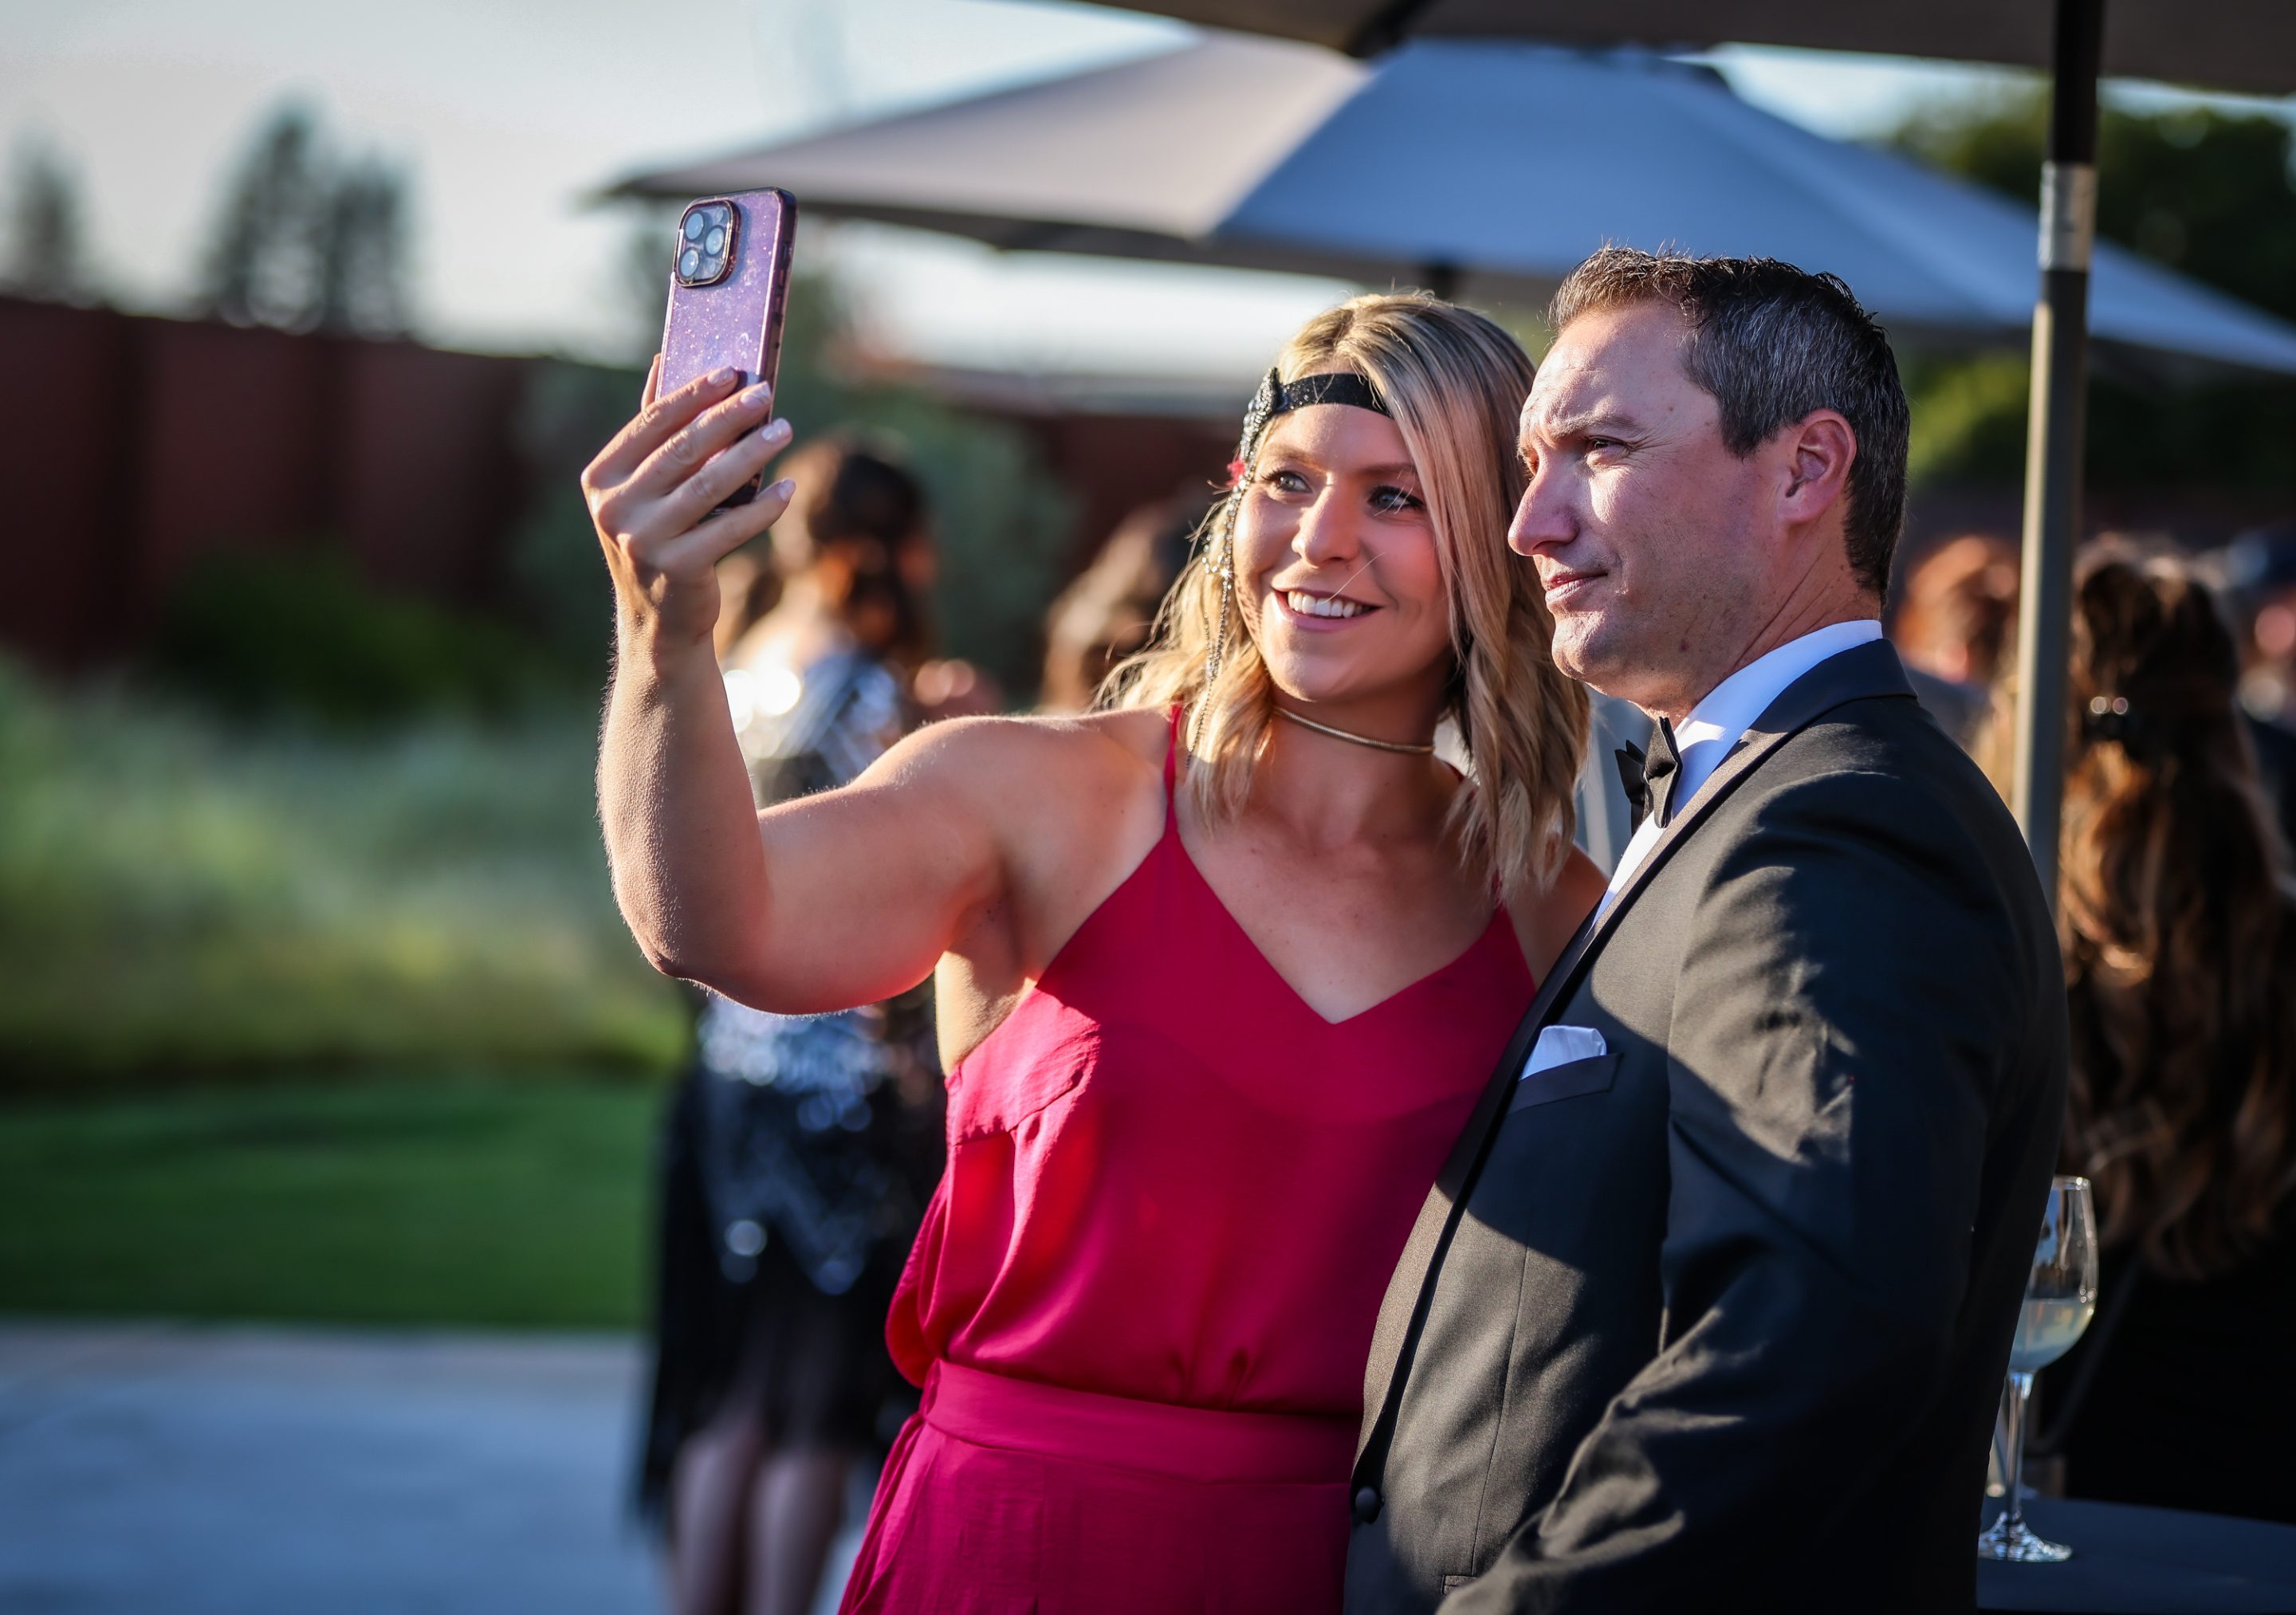 A man and woman taking a selfie at an outdoor event hosted by The LIME Foundation in Sonoma County.